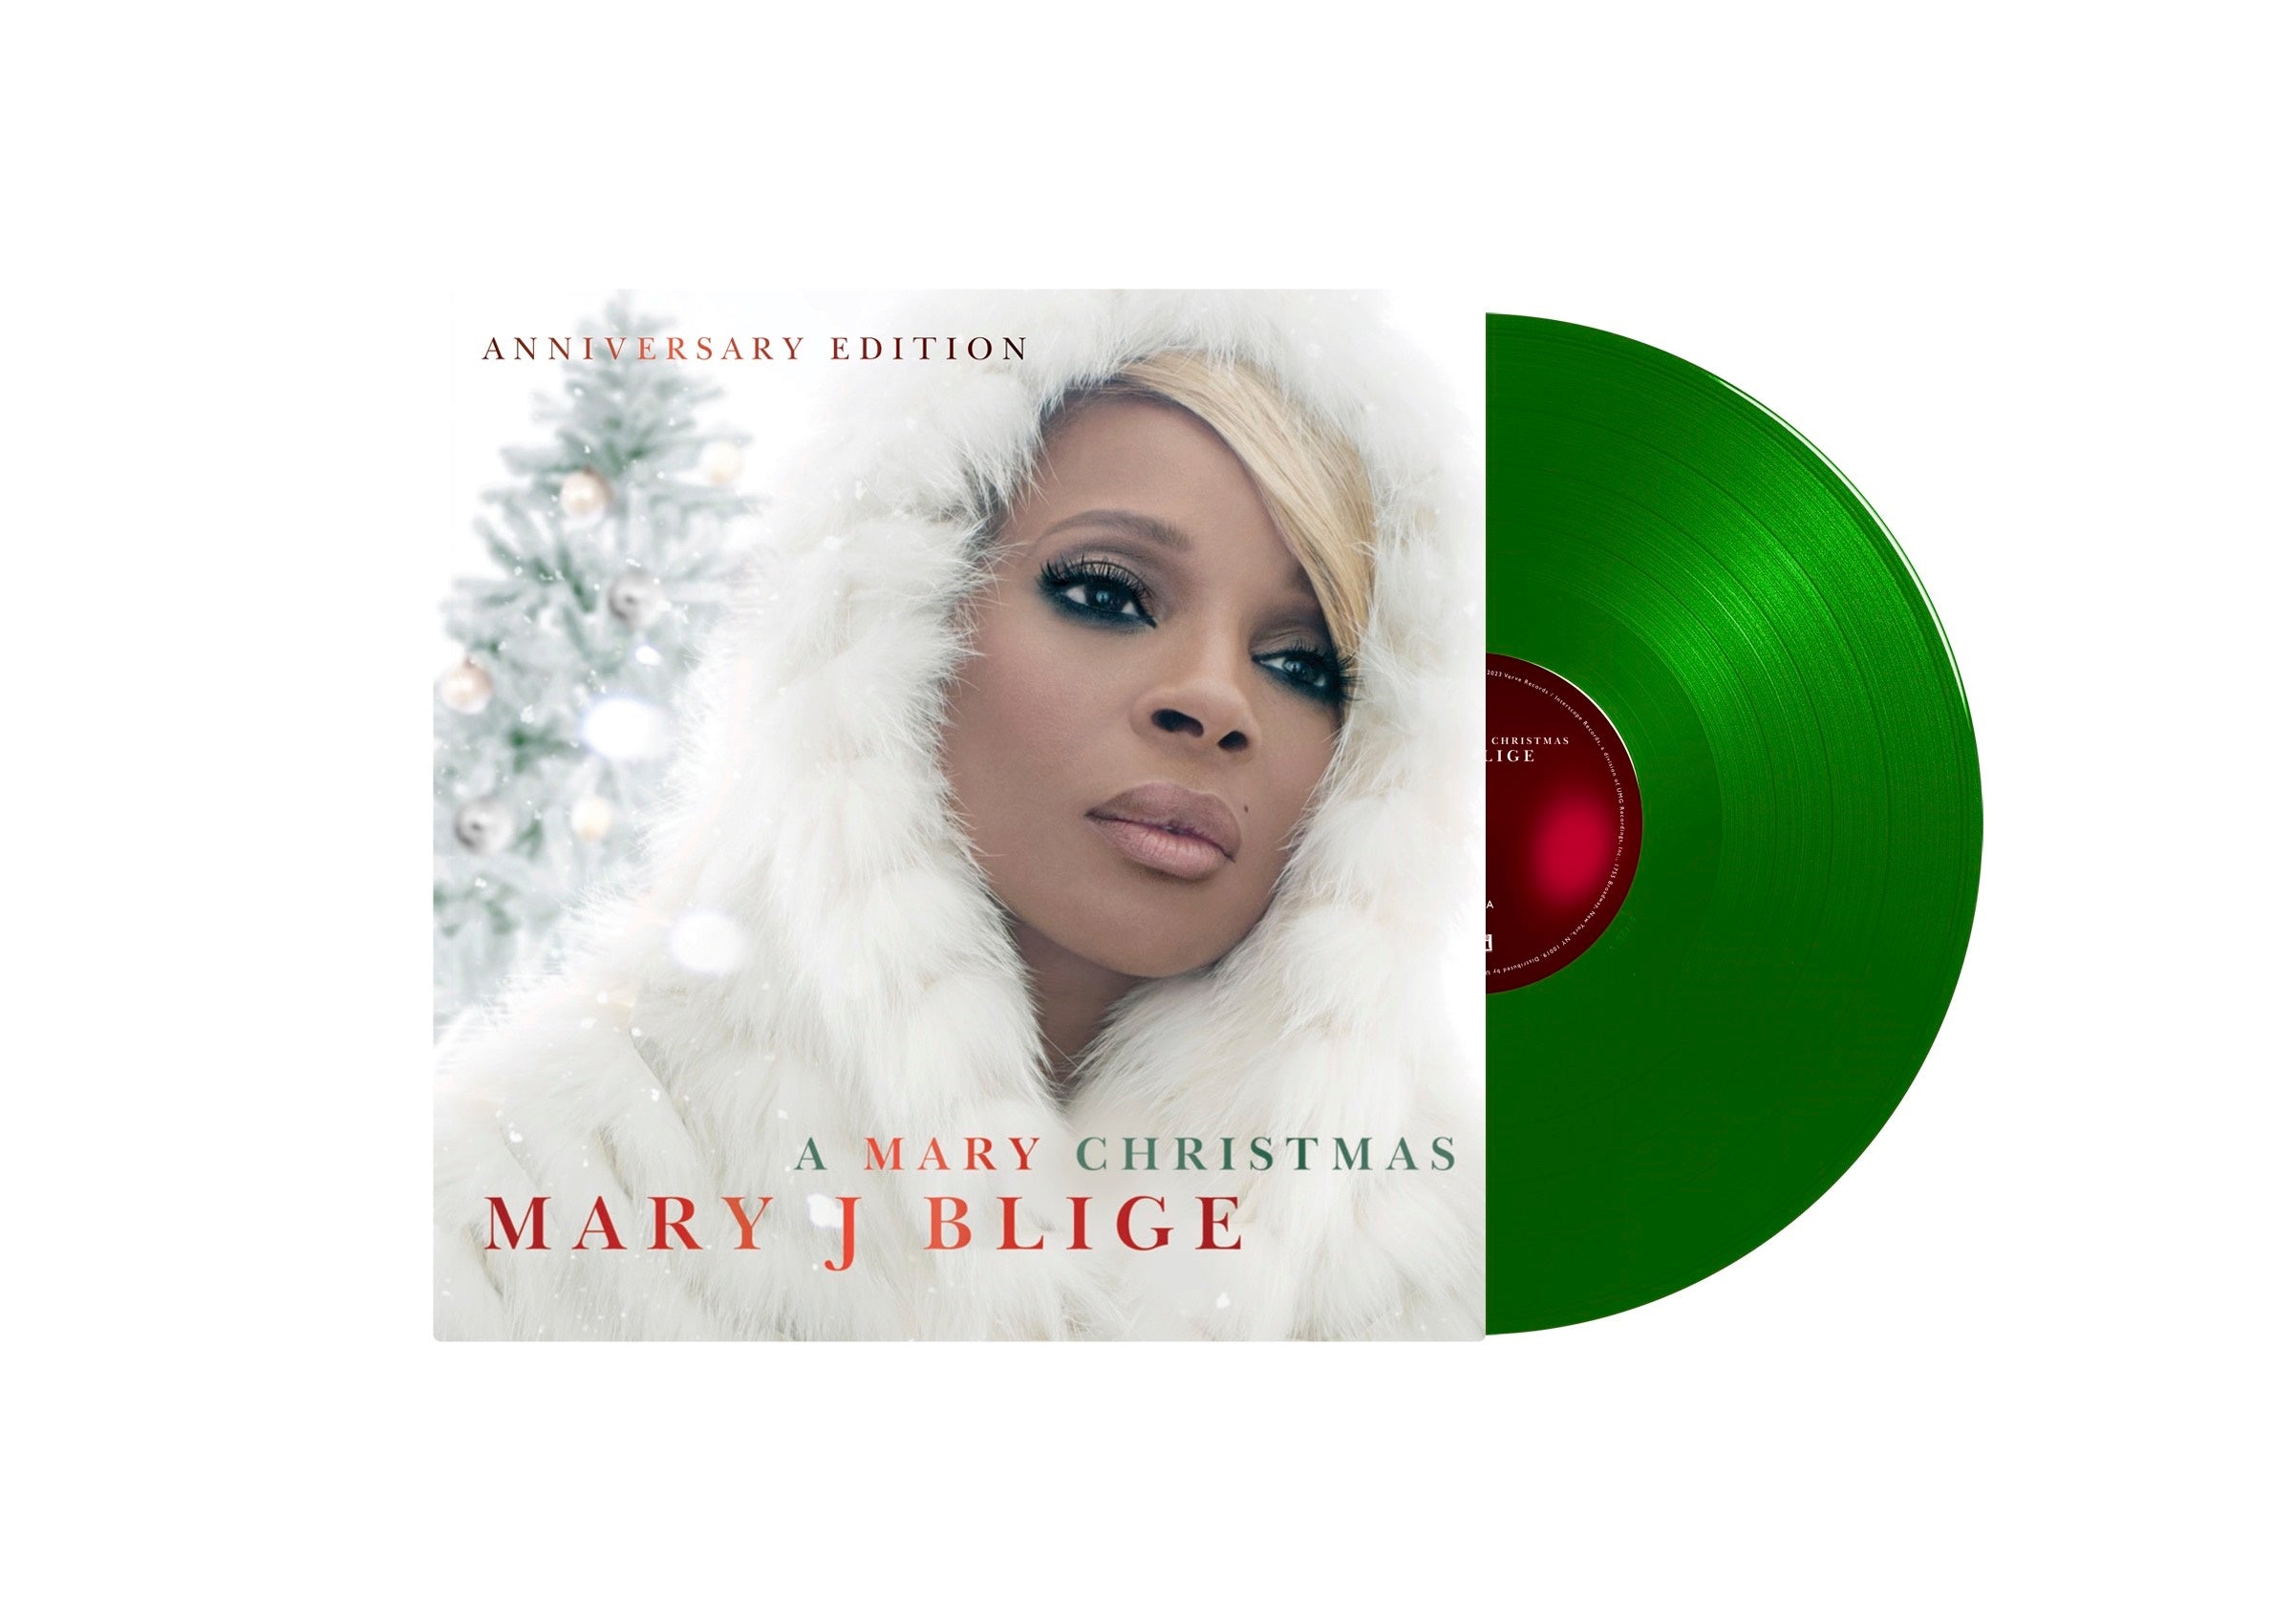 Mary J. Blige | A Mary Christmas (Anniversary Edition) [Translucent Green 2 LP] | Vinyl